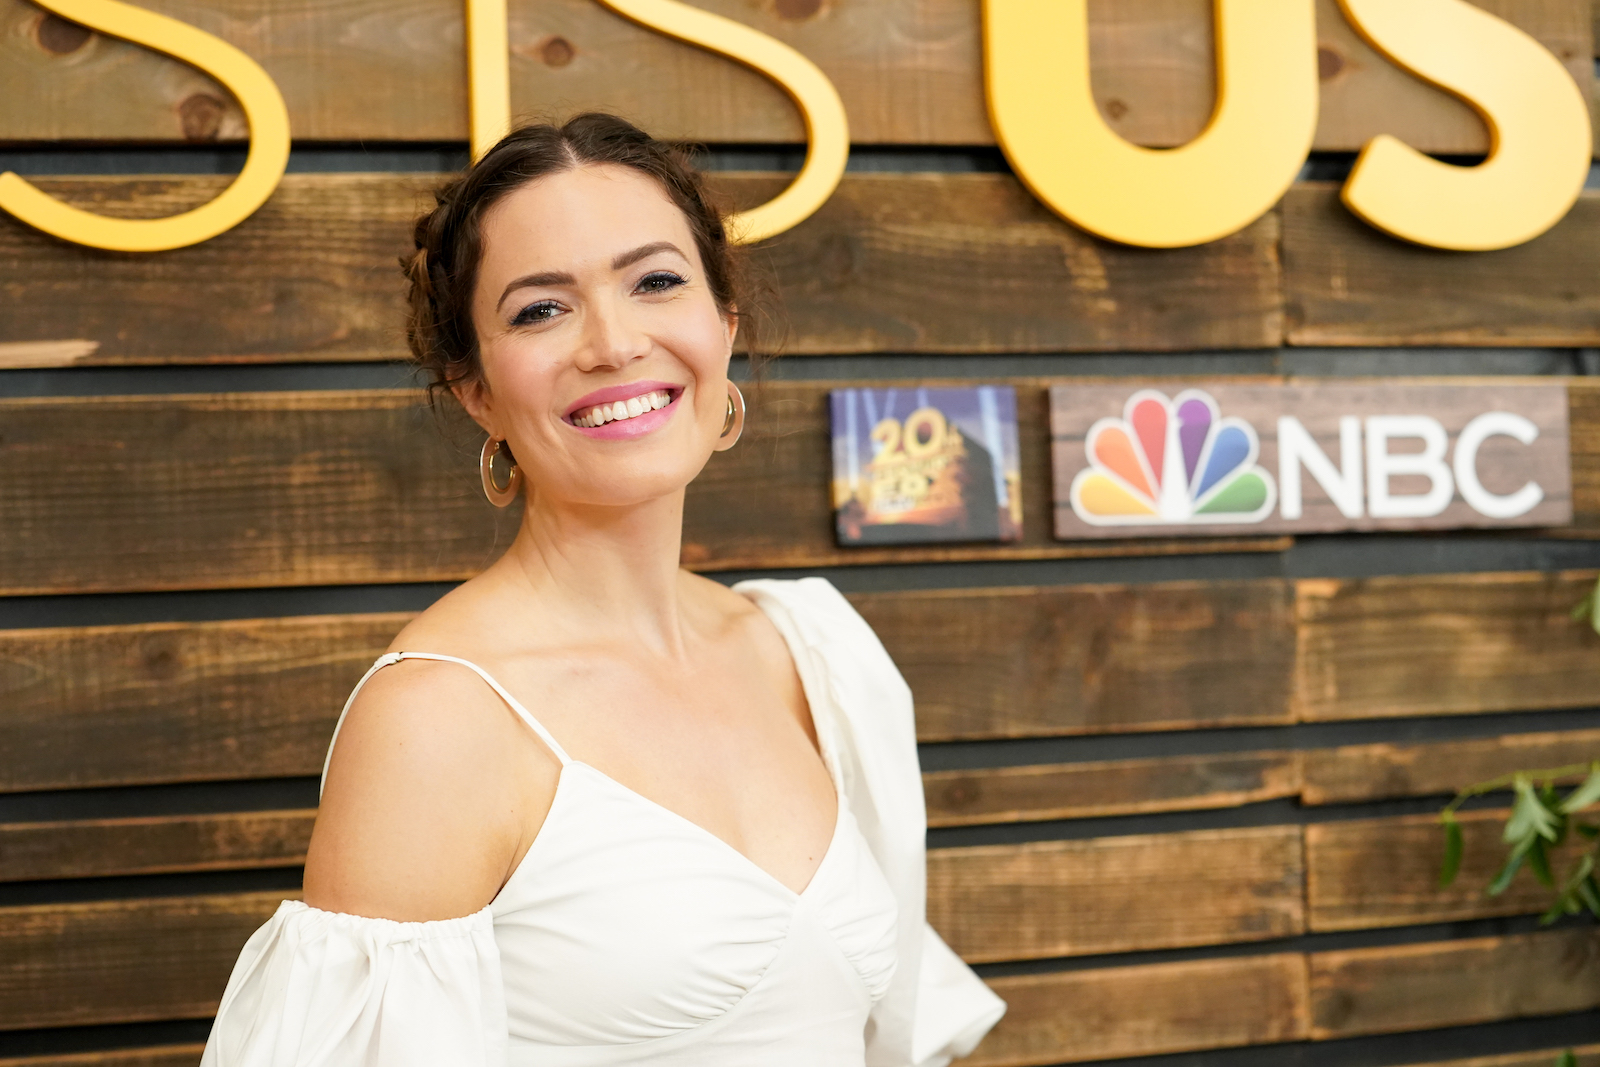 Actress Mandy Moore wears a white top and stands in front of a wooden backdrop with signage for NBC, 20th Century Fox, and the TV show This is Us.